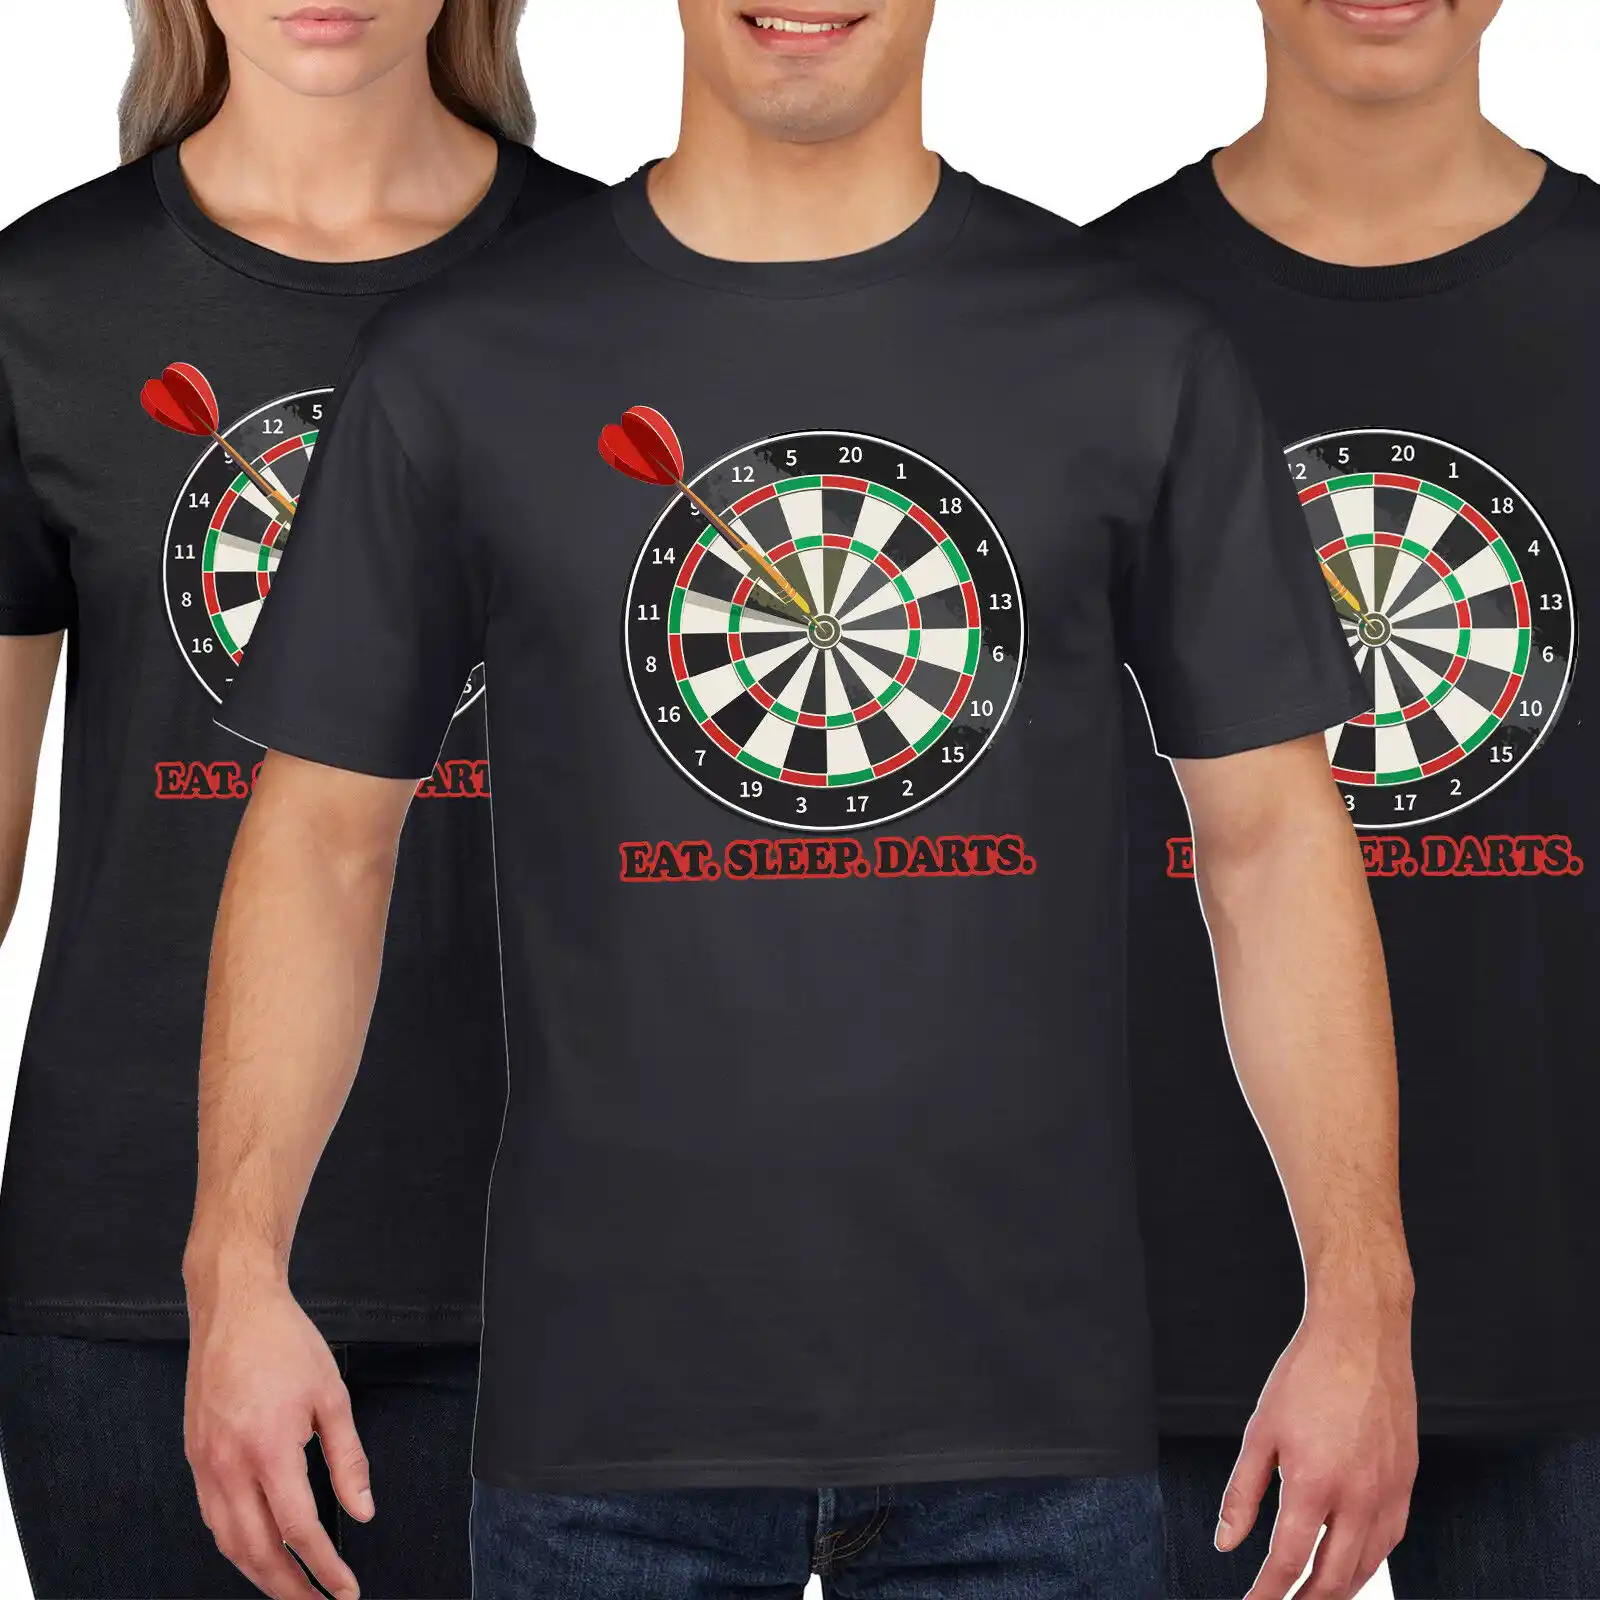 Darts Funny T-shirt Heart Beat Pulse Pub Weekend Tee Adult Unisex QUALITY Top